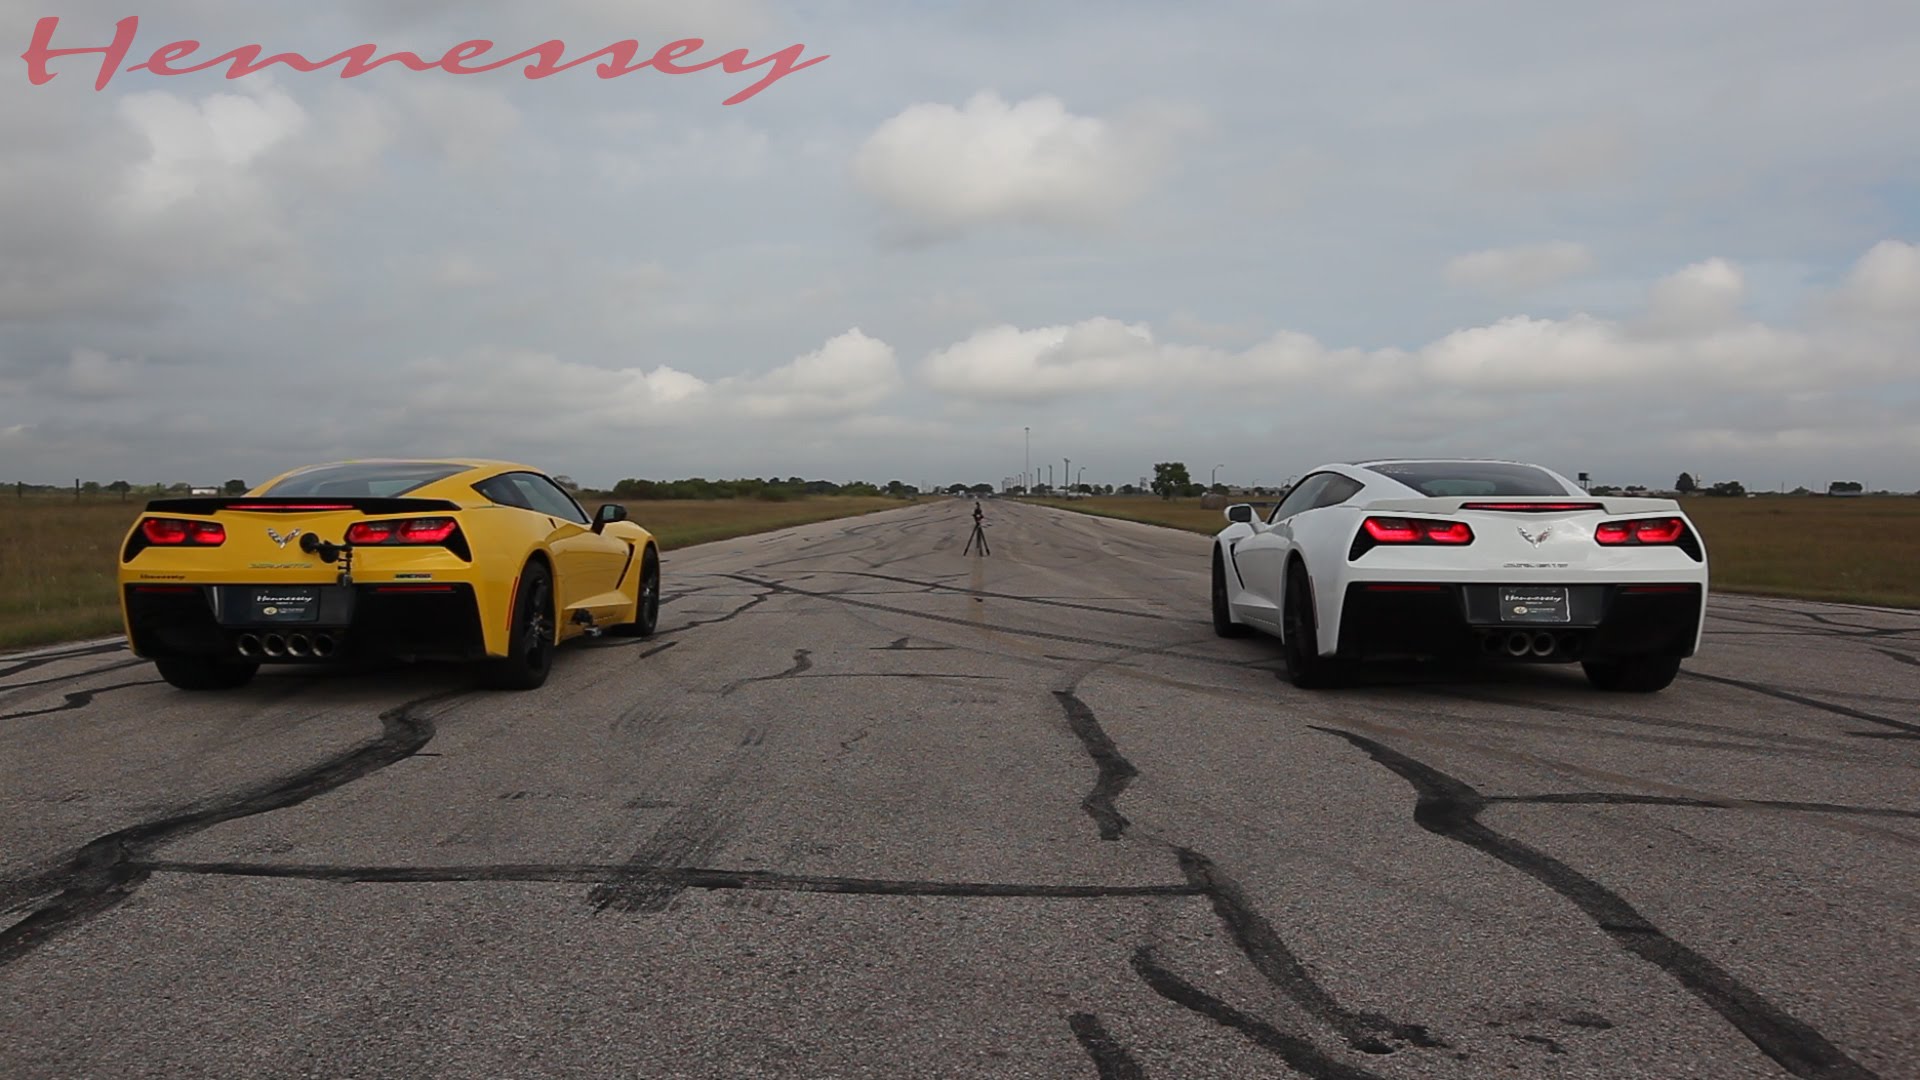 Amazing Hennessey Corvette Pictures & Backgrounds